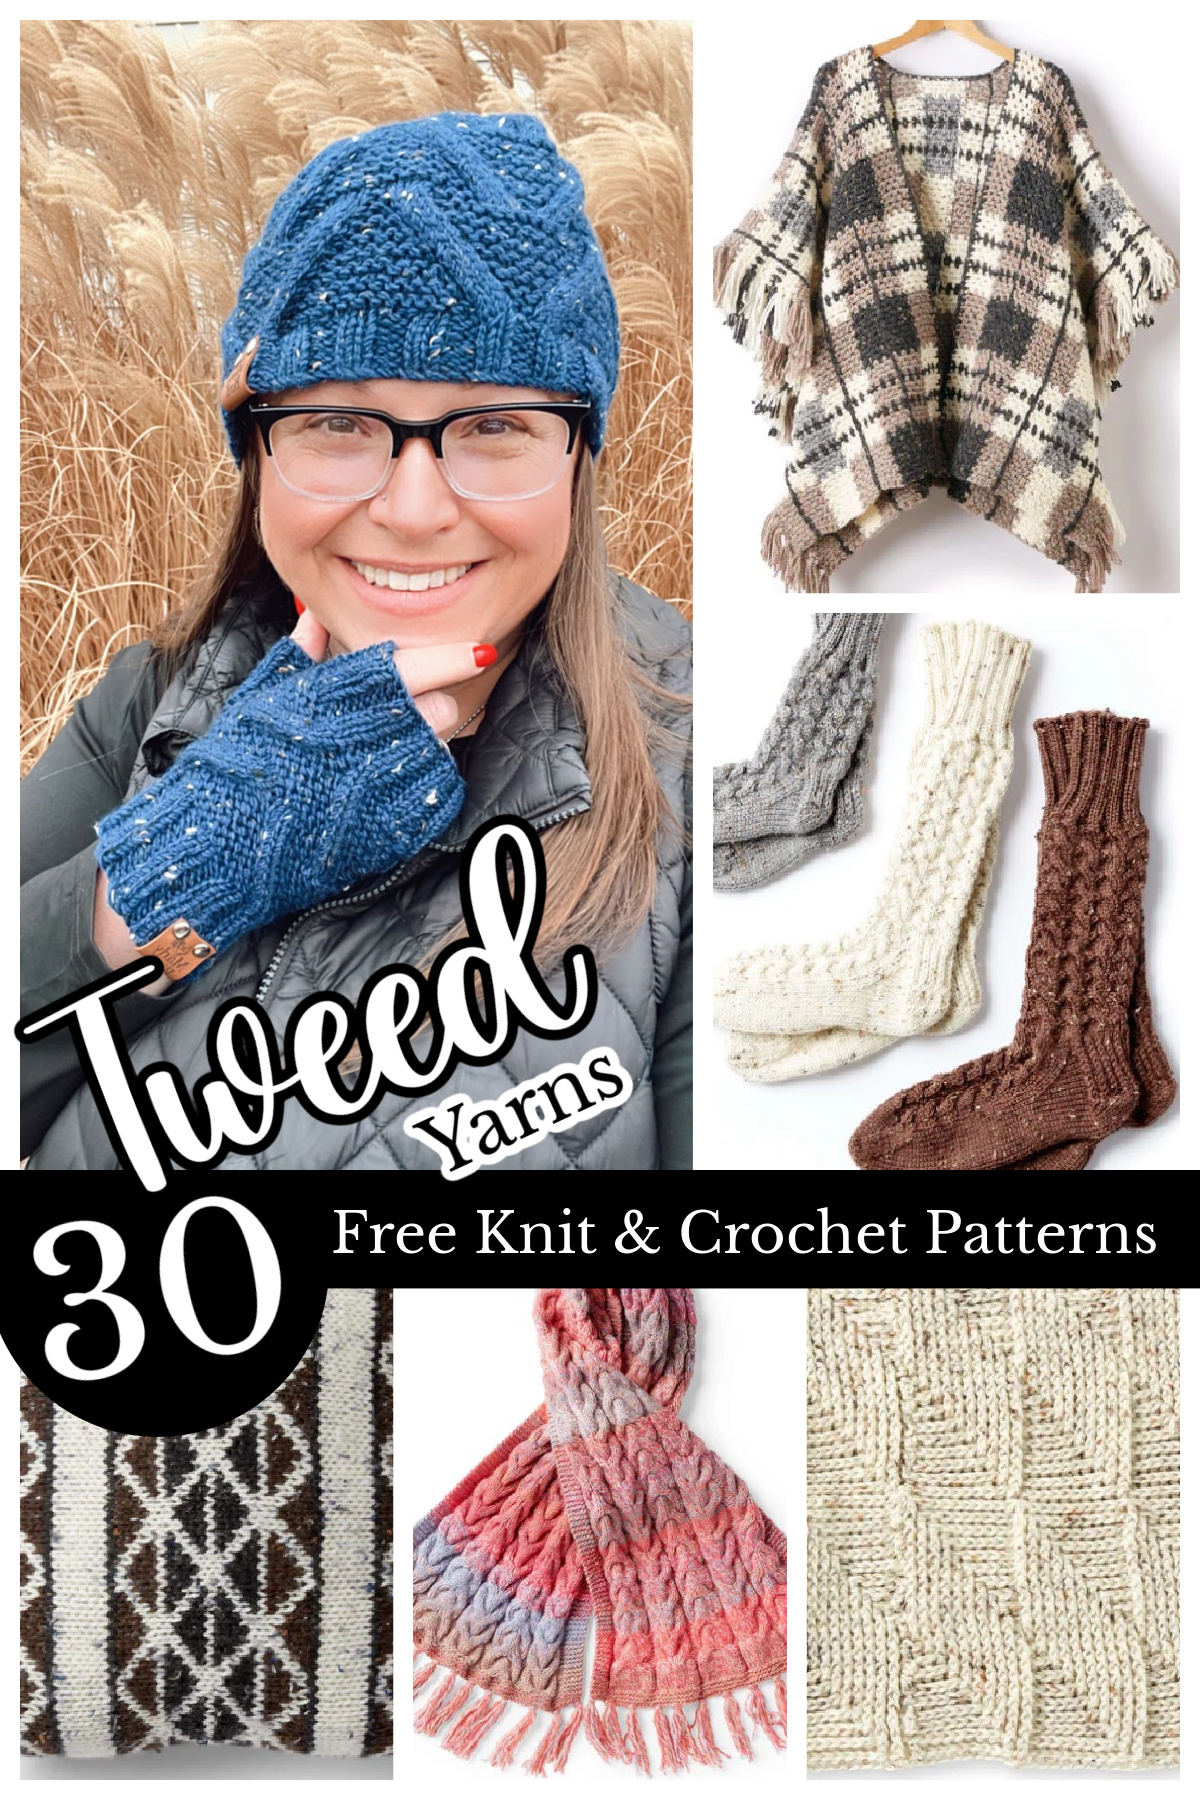 Tweed Yarn - 30 free knit and crochet patterns on the marlybird website. Image has a collage of 6 images using tweed yarn.